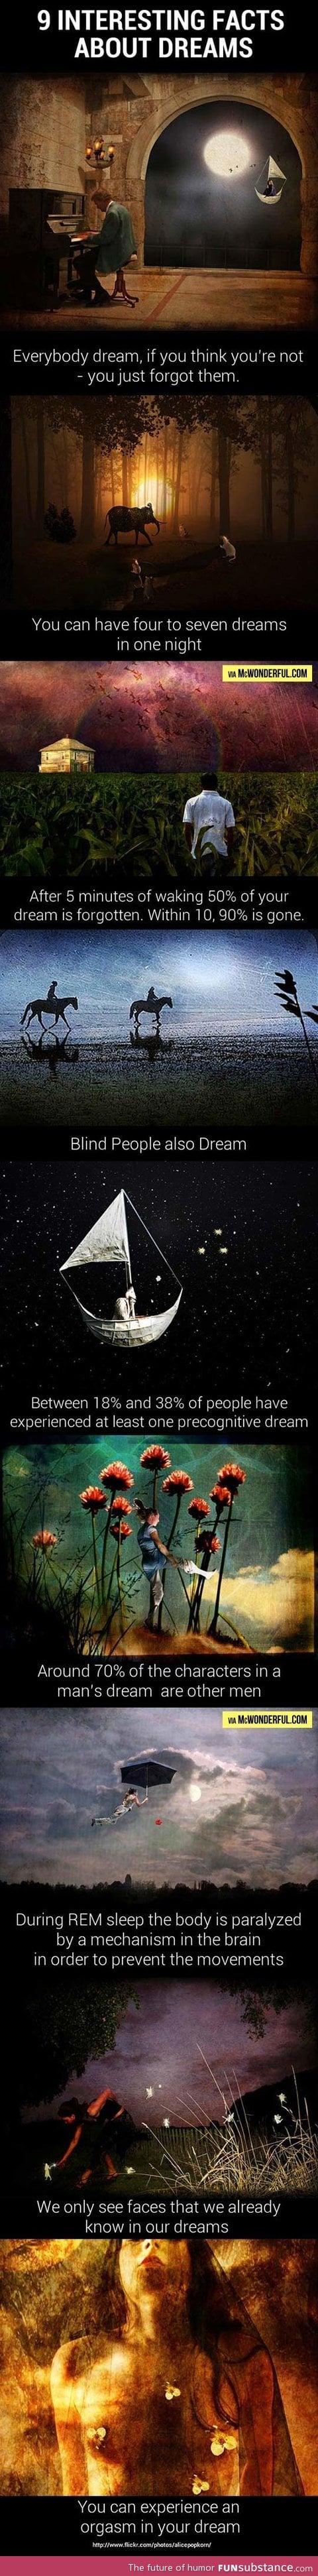 9 Cool Facts About Dreams